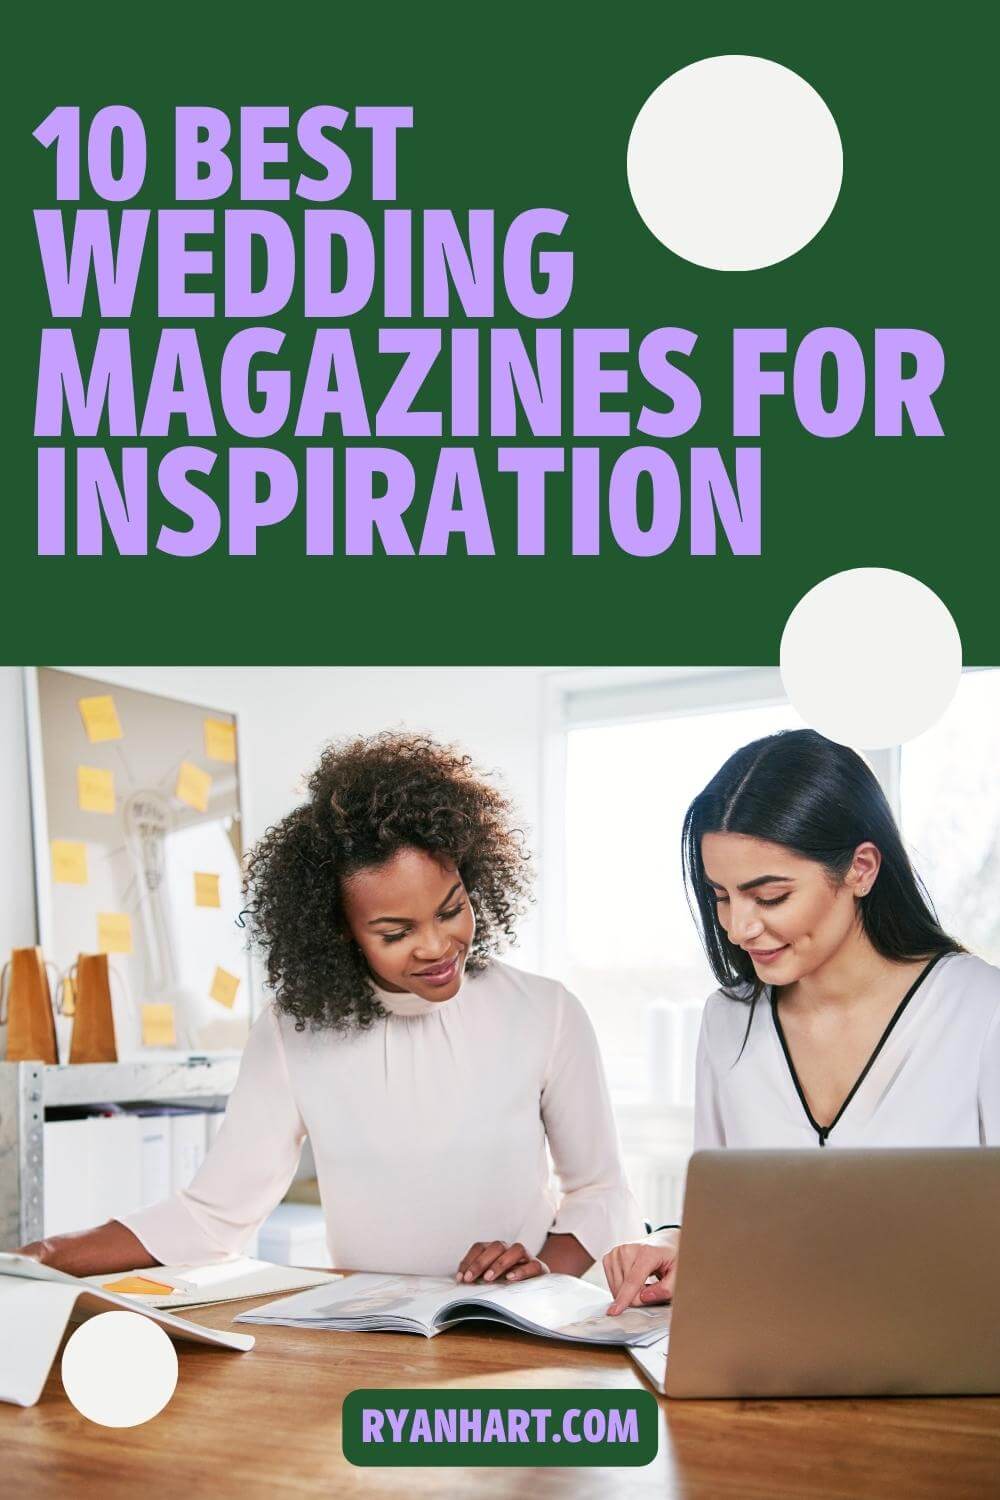 Wedding planner and bride reading a magazine together